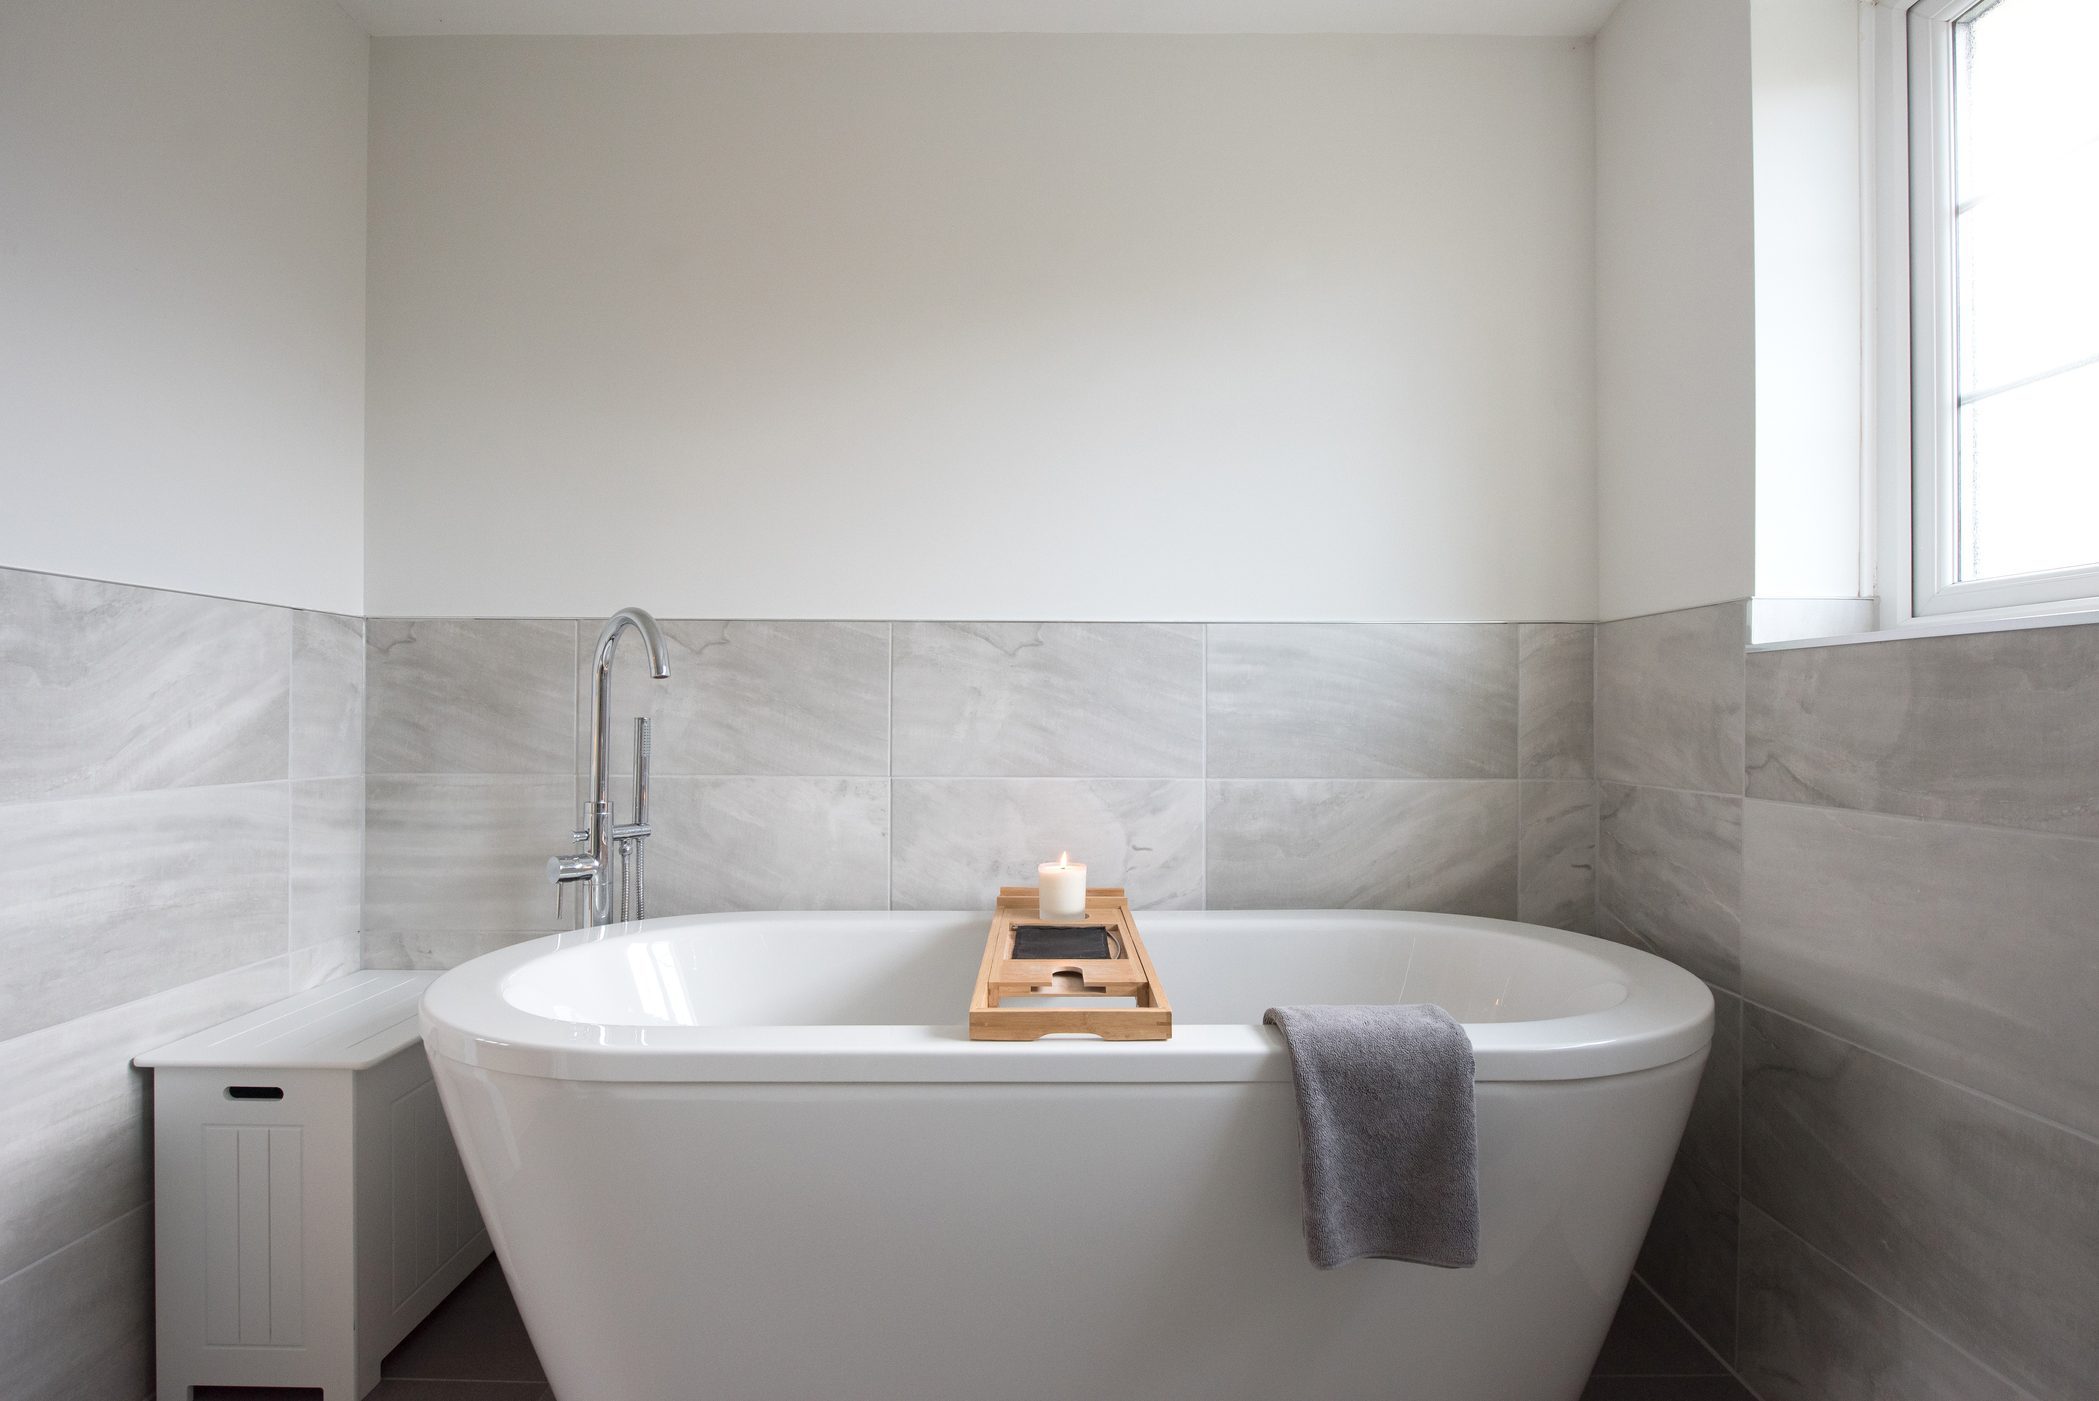 8 Types of Bathtubs: How to Choose the Right One | Family Handyman